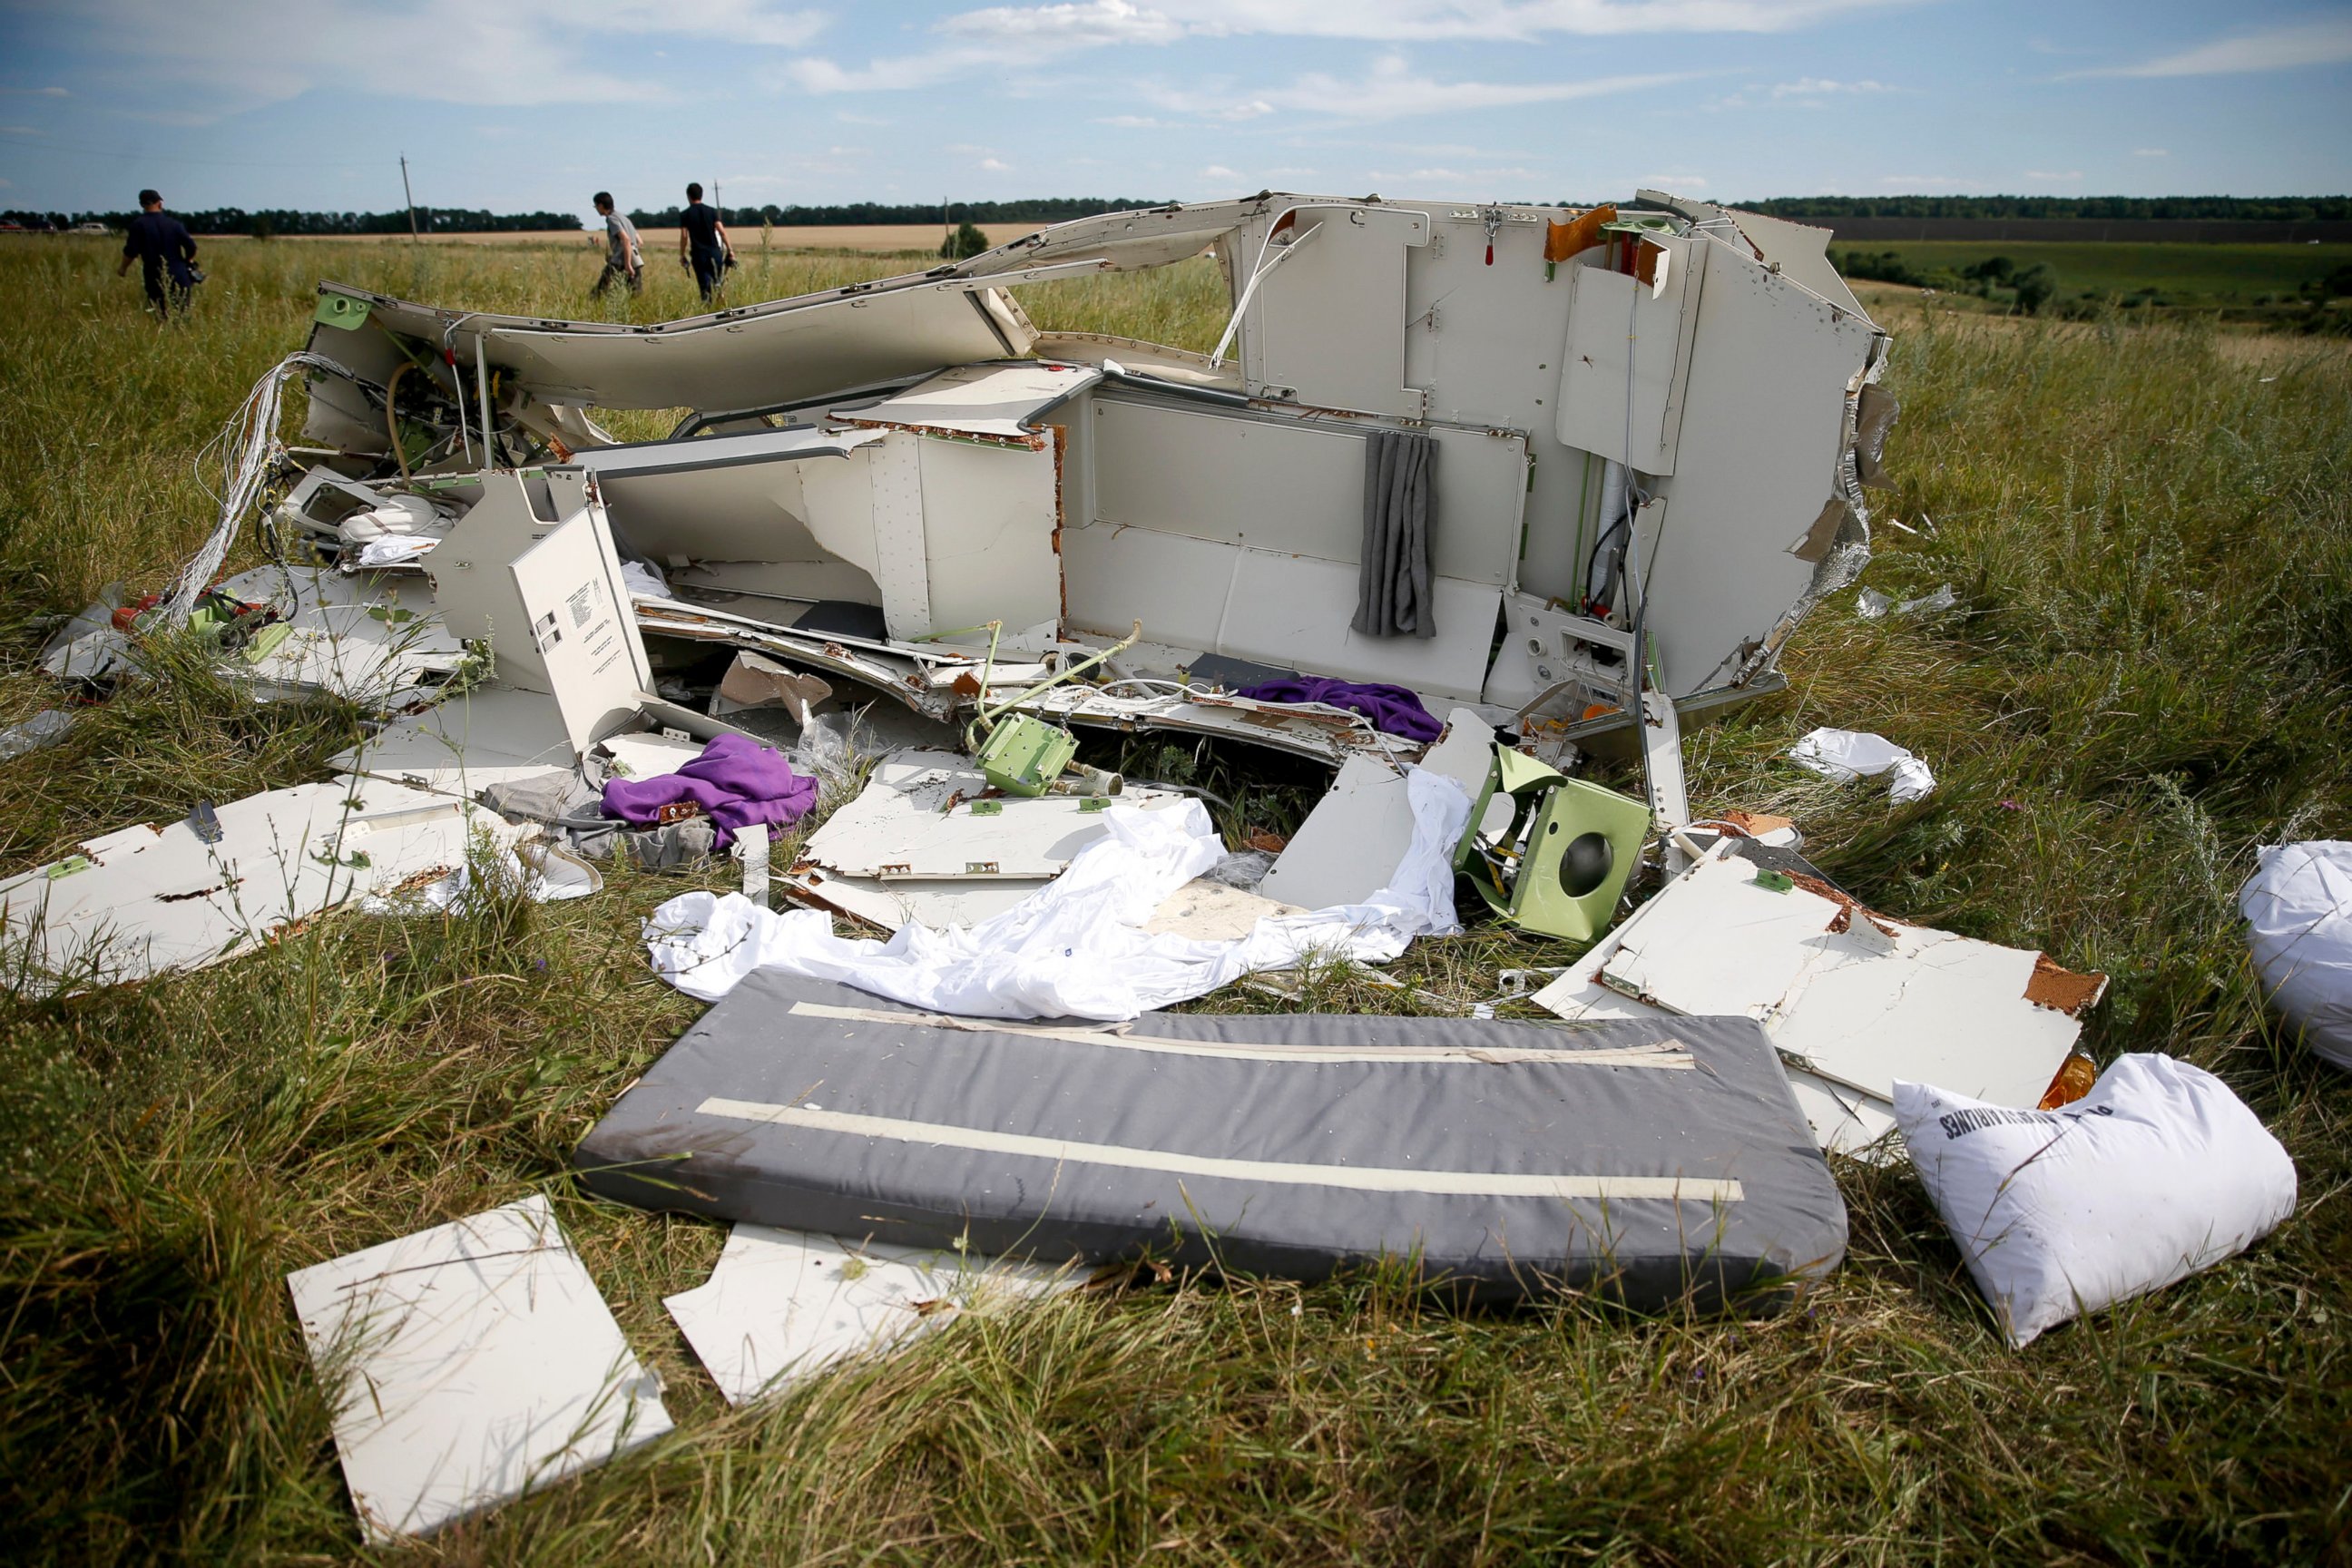 PHOTO: Parts of the wreckage are seen at a crash site of the Malaysia Airlines Flight MH17 near the village of Hrabove (Grabovo), Ukraine, July 21, 2014.